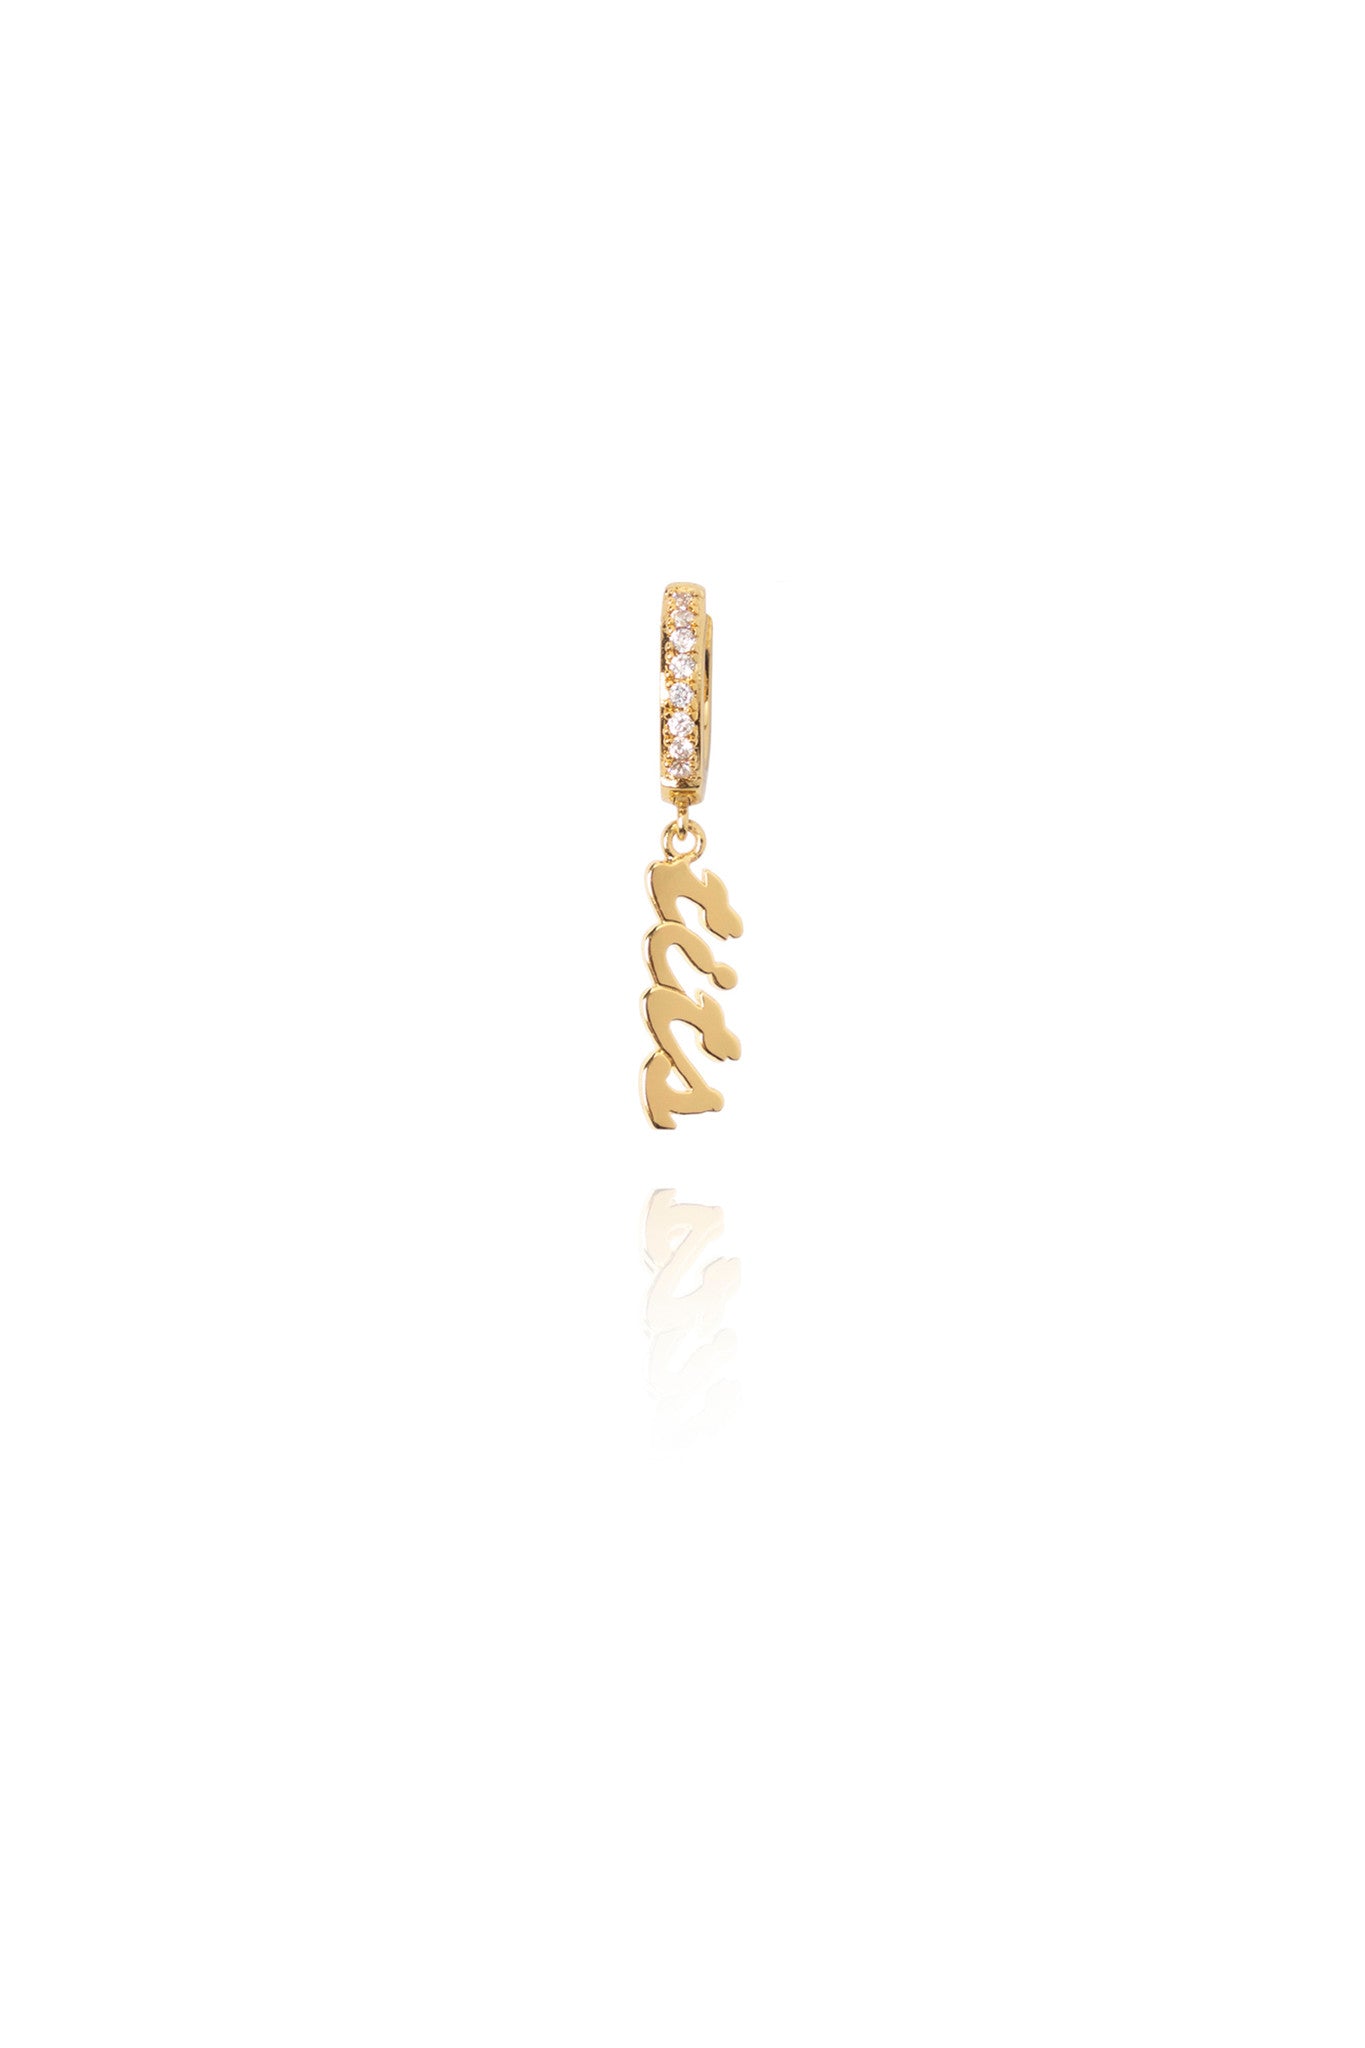 TITS CRYSTAL EARRING GOLD by T.I.T.S.